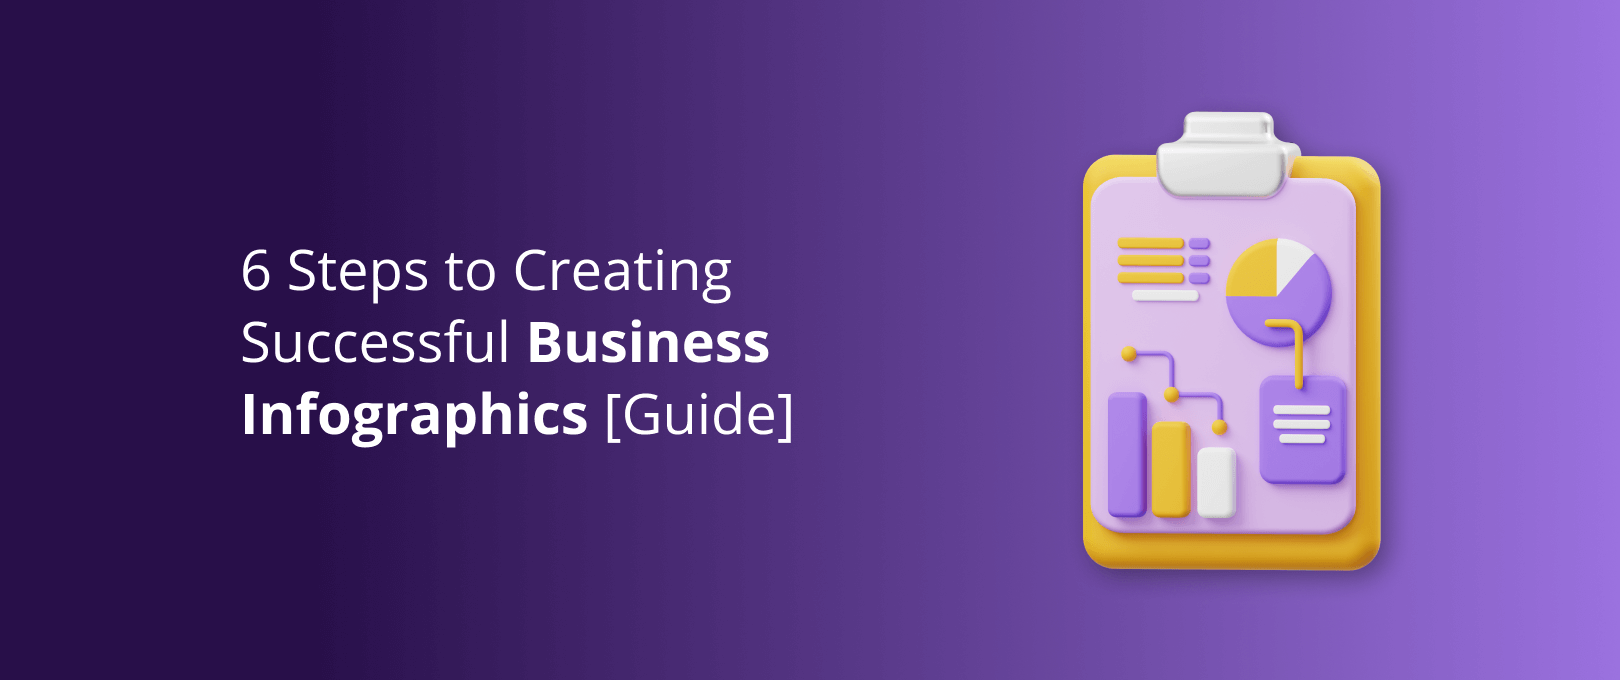 6 Steps to Creating Successful Business Infographics [Guide] - DevriX